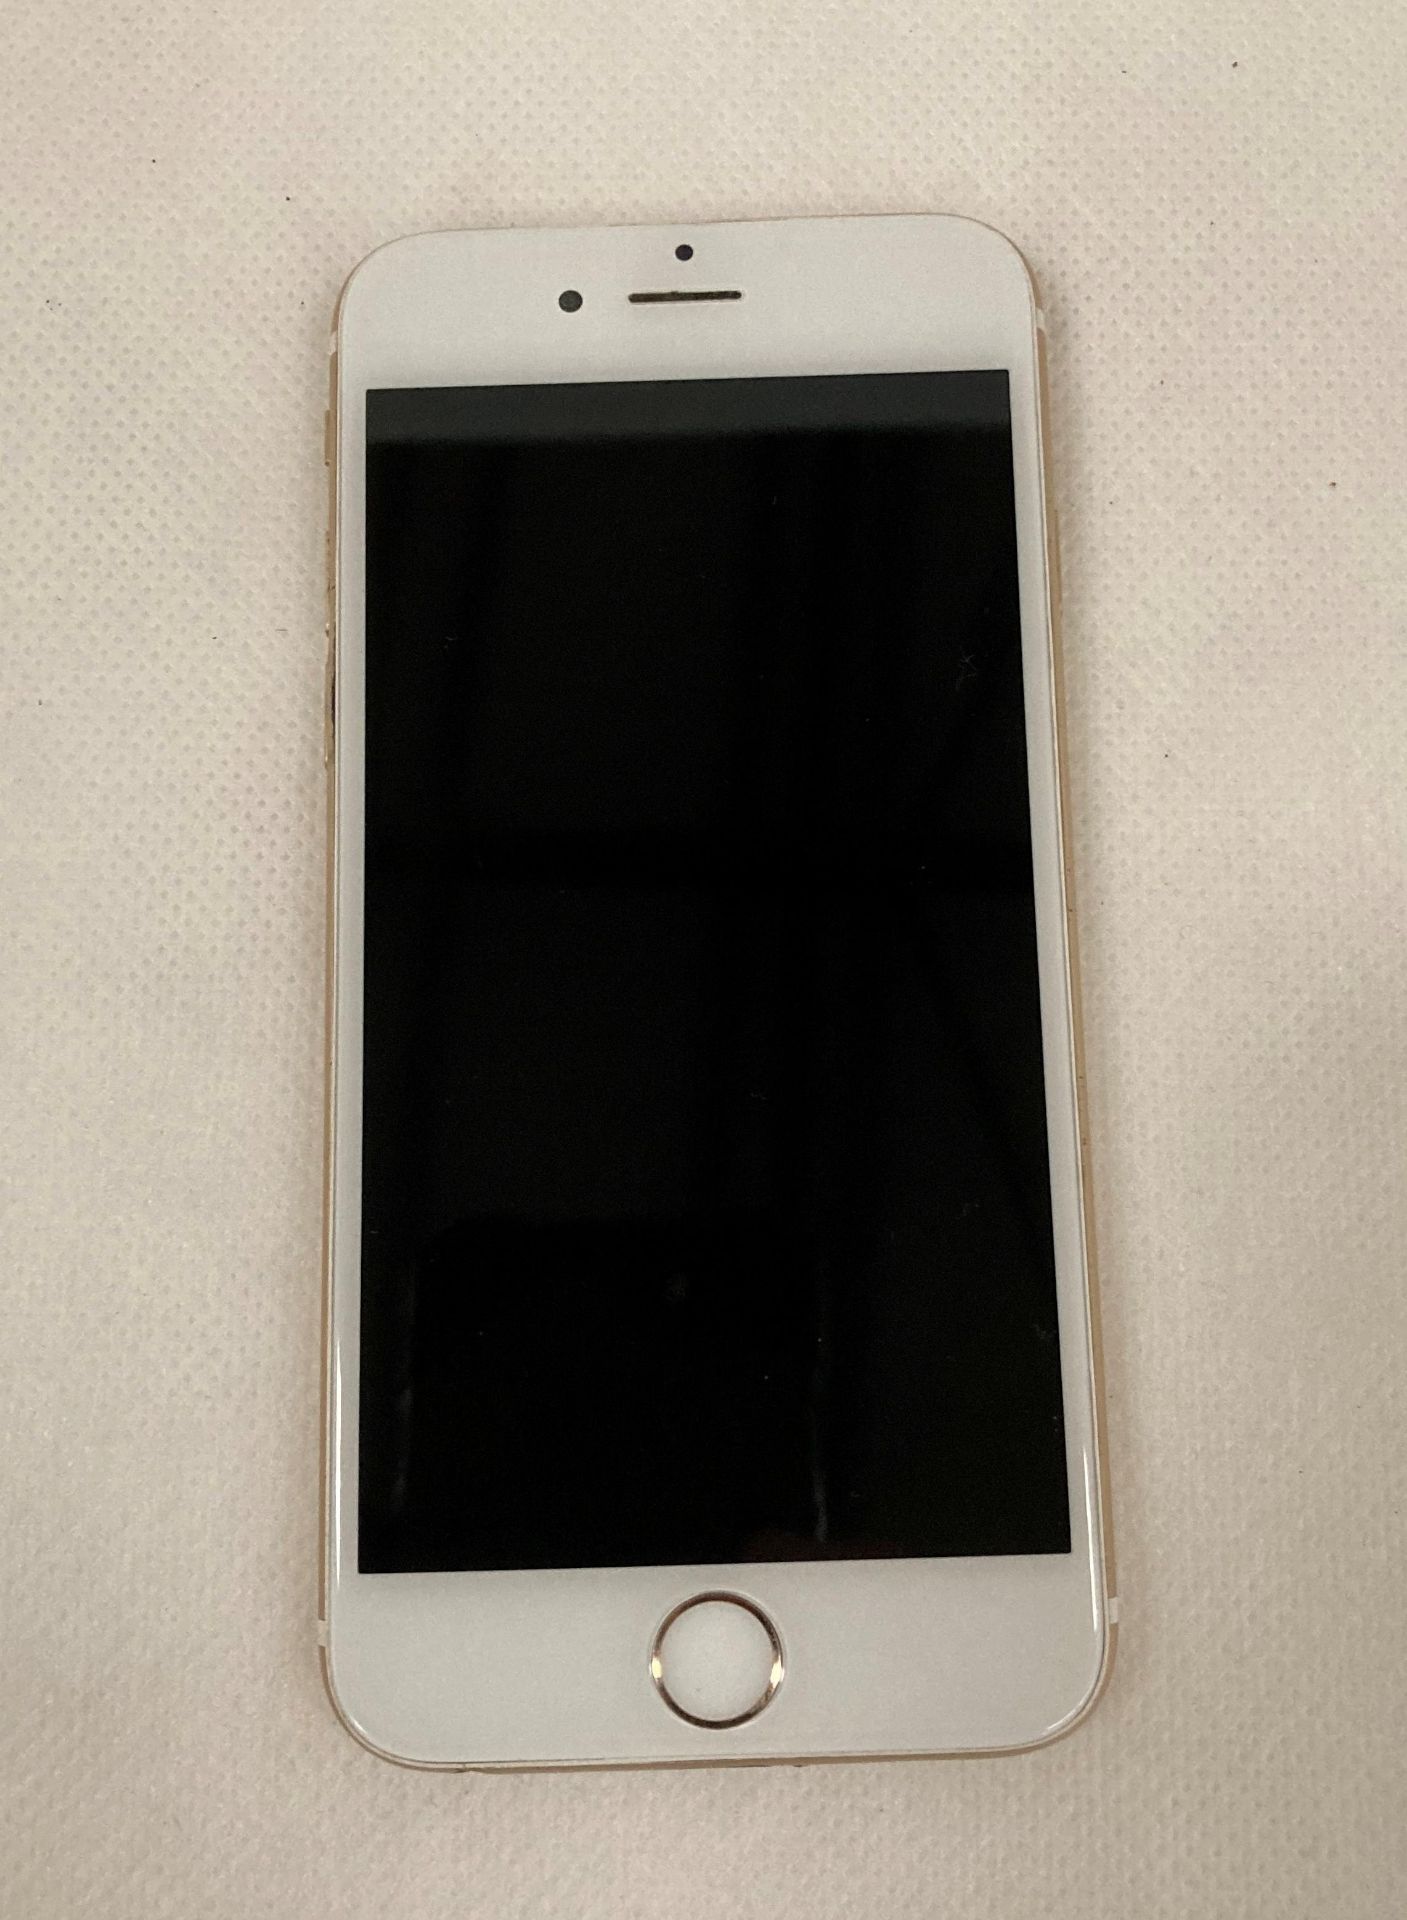 iPhone 6 model: A1586 - white and rose gold - few small marks to rear of case - phone has been